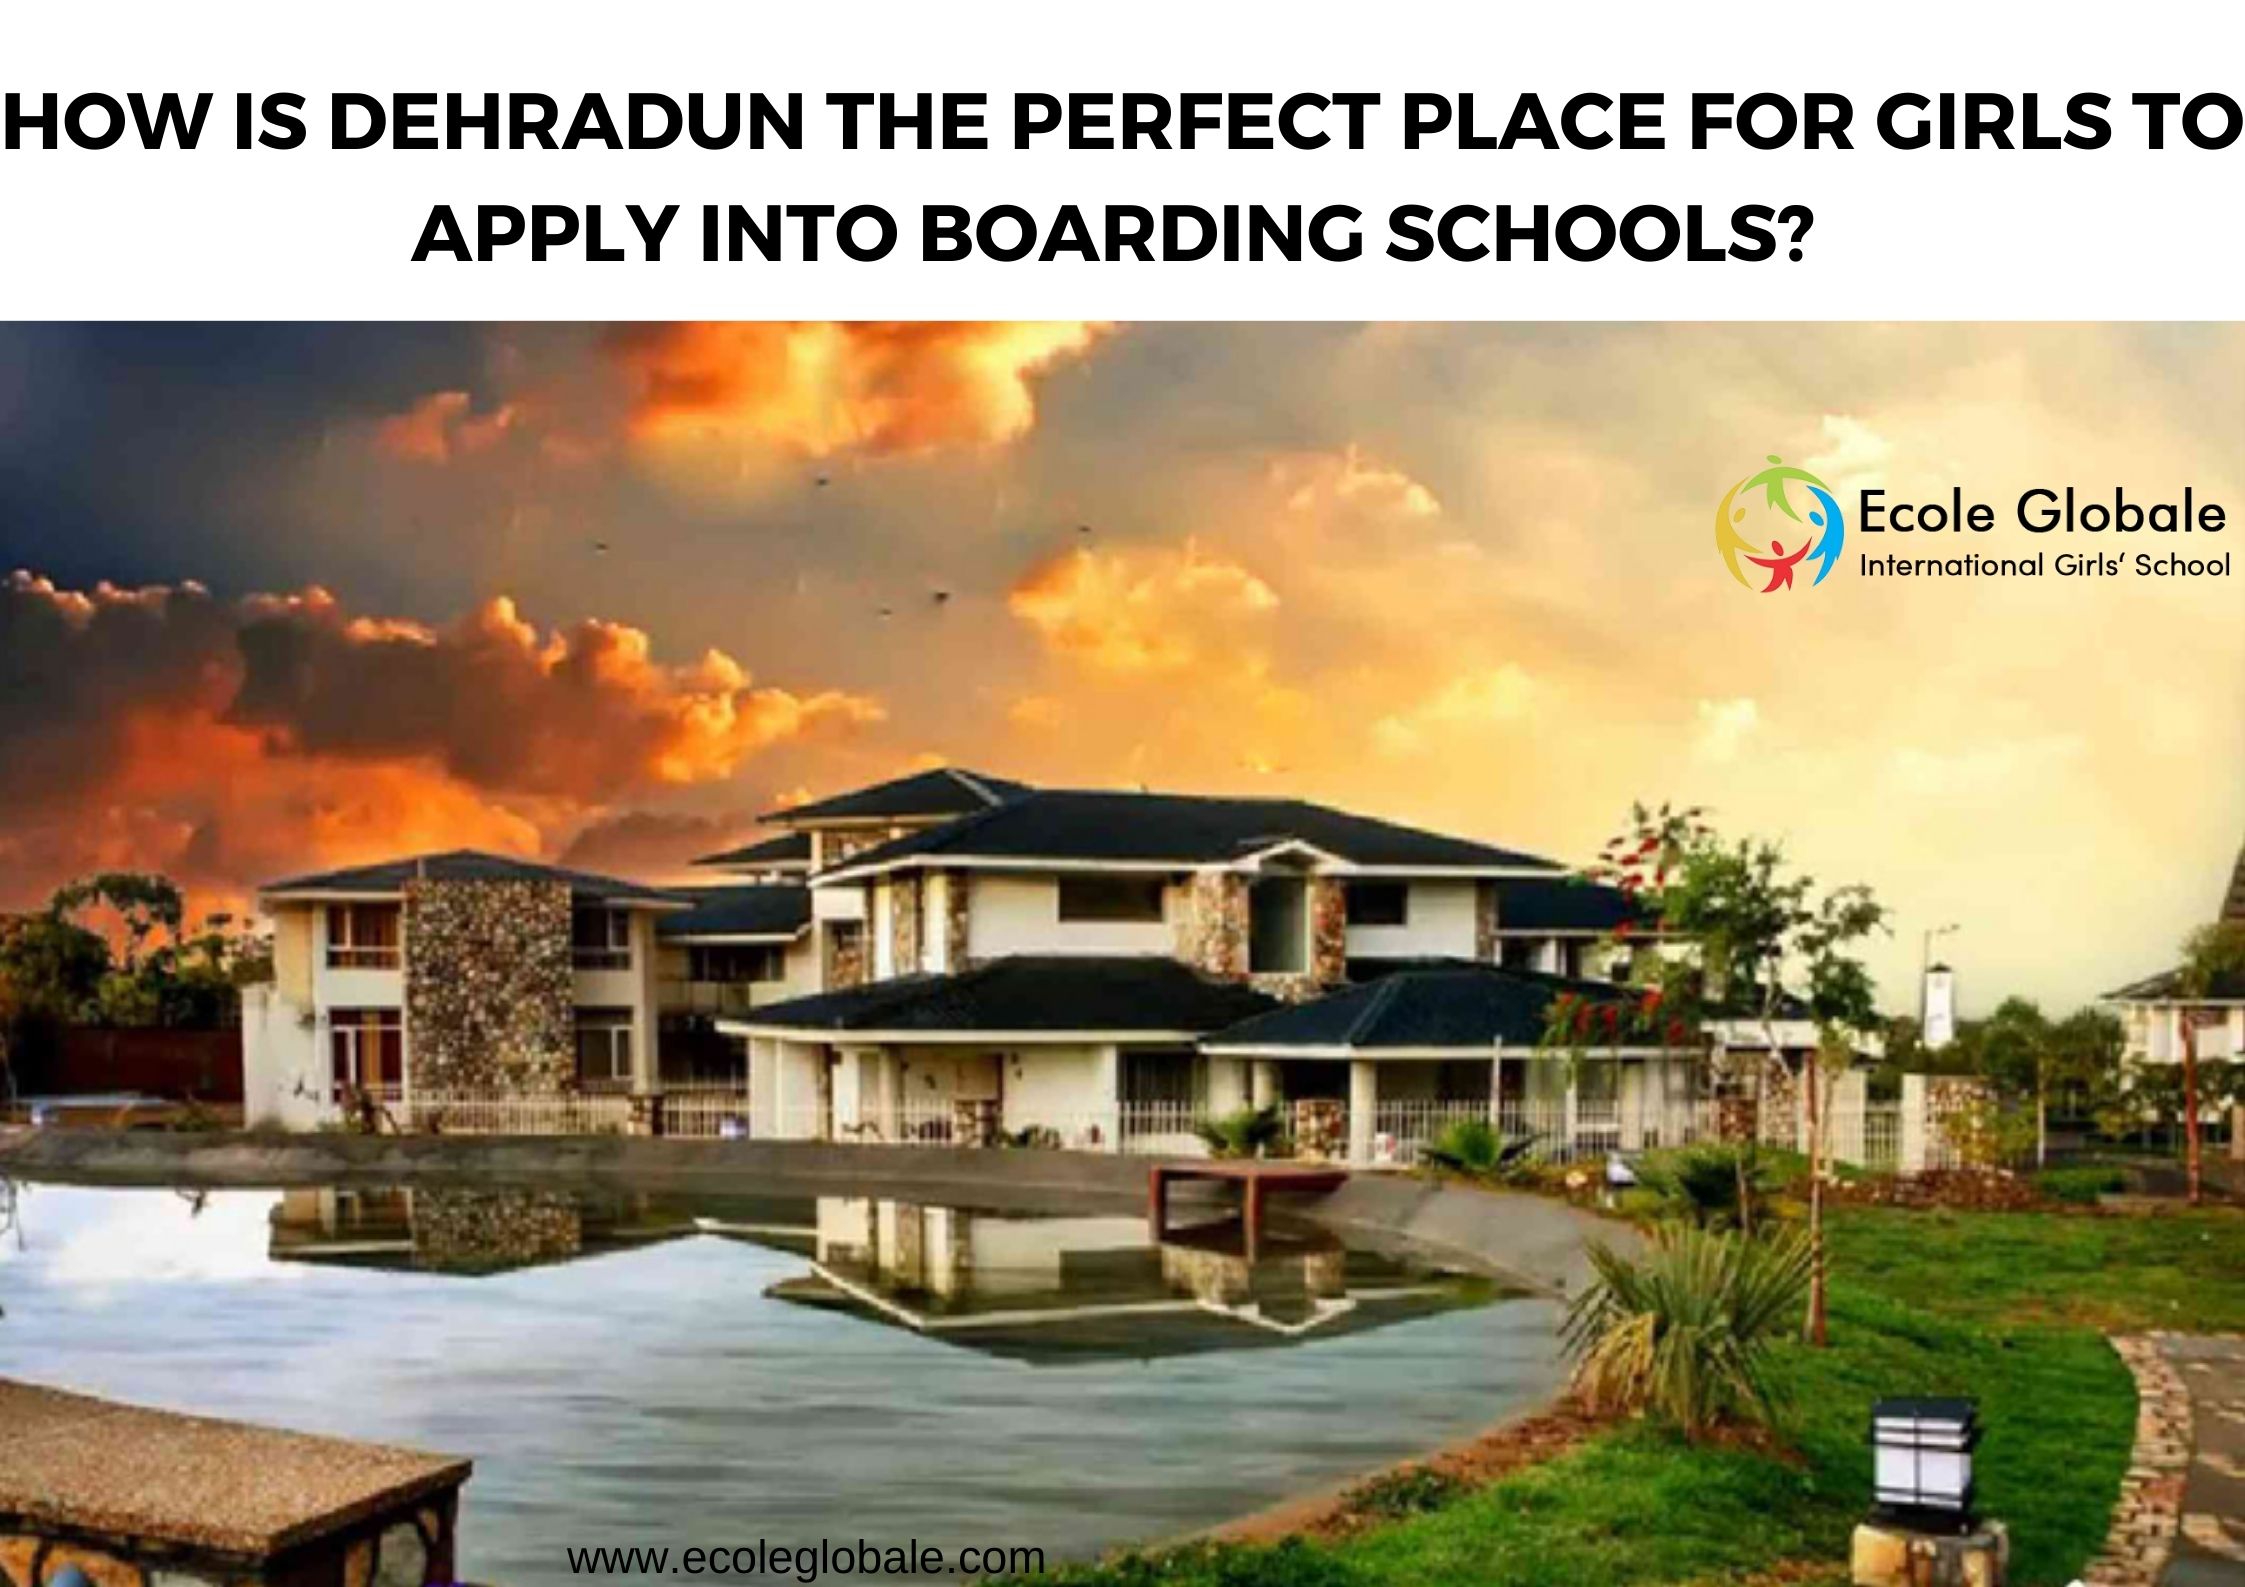 HOW IS DEHRADUN THE PERFECT PLACE FOR GIRLS TO APPLY INTO BOARDING SCHOOLS?